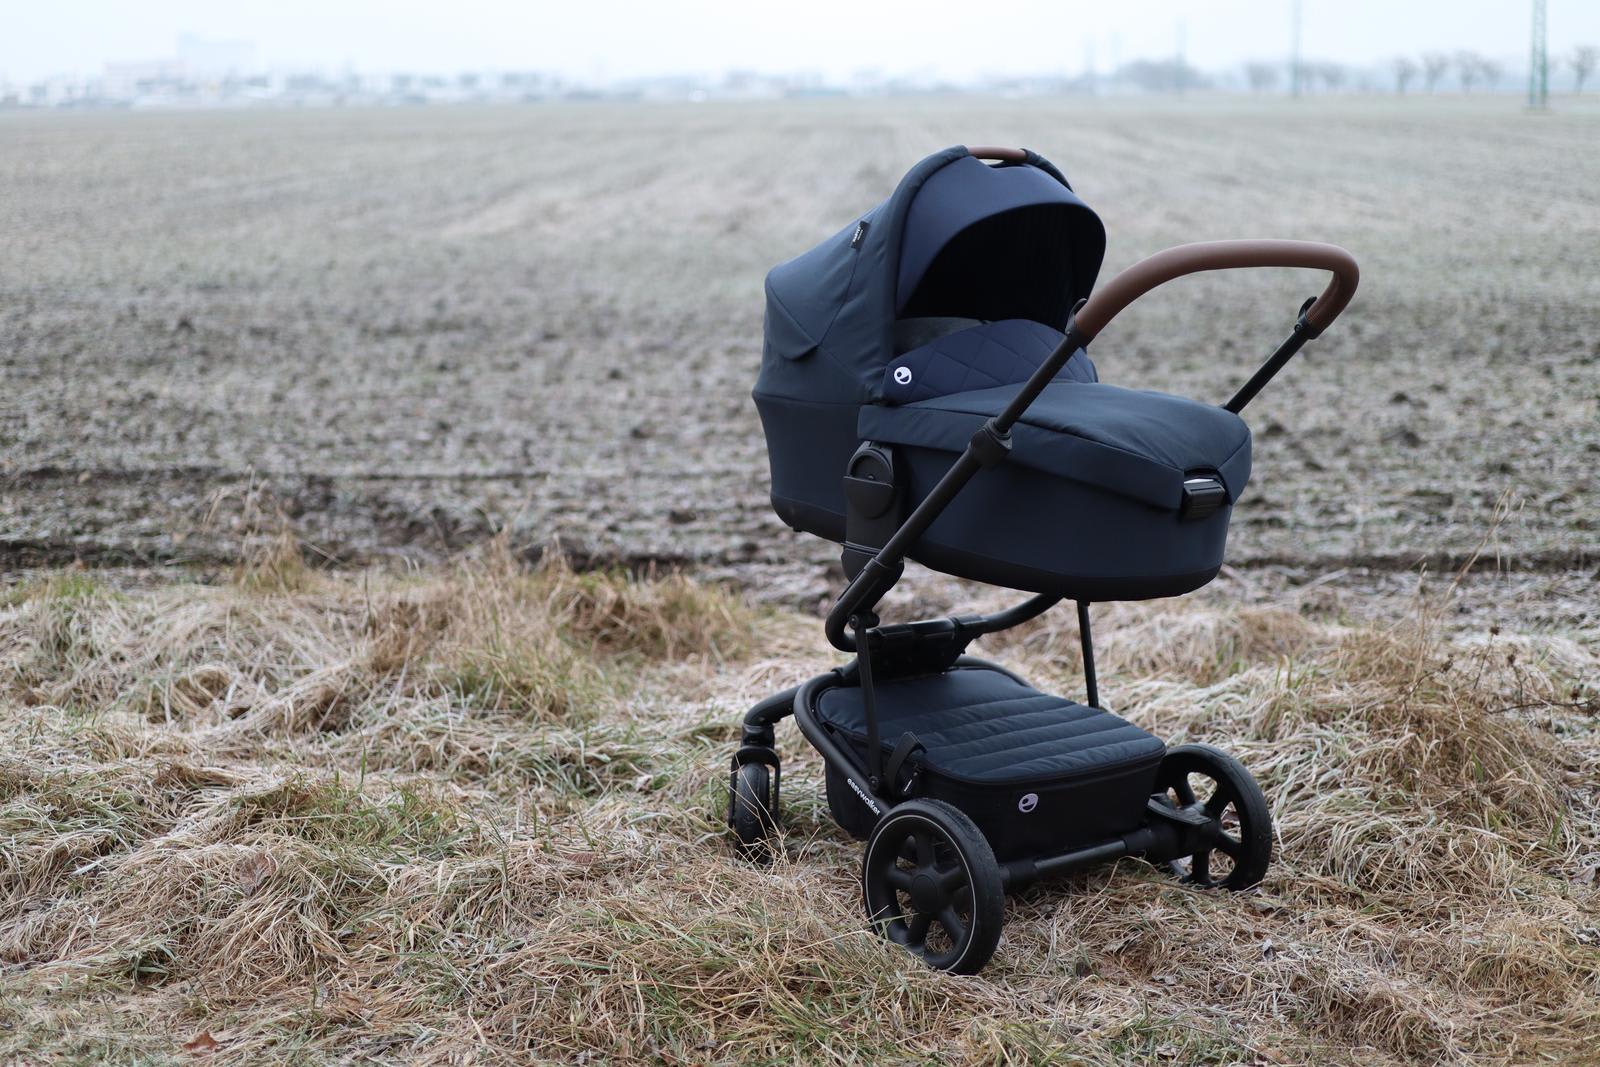 Easywalker Harvey2 stroller review: a in a lightweight package | Strollberry expert reviews & news